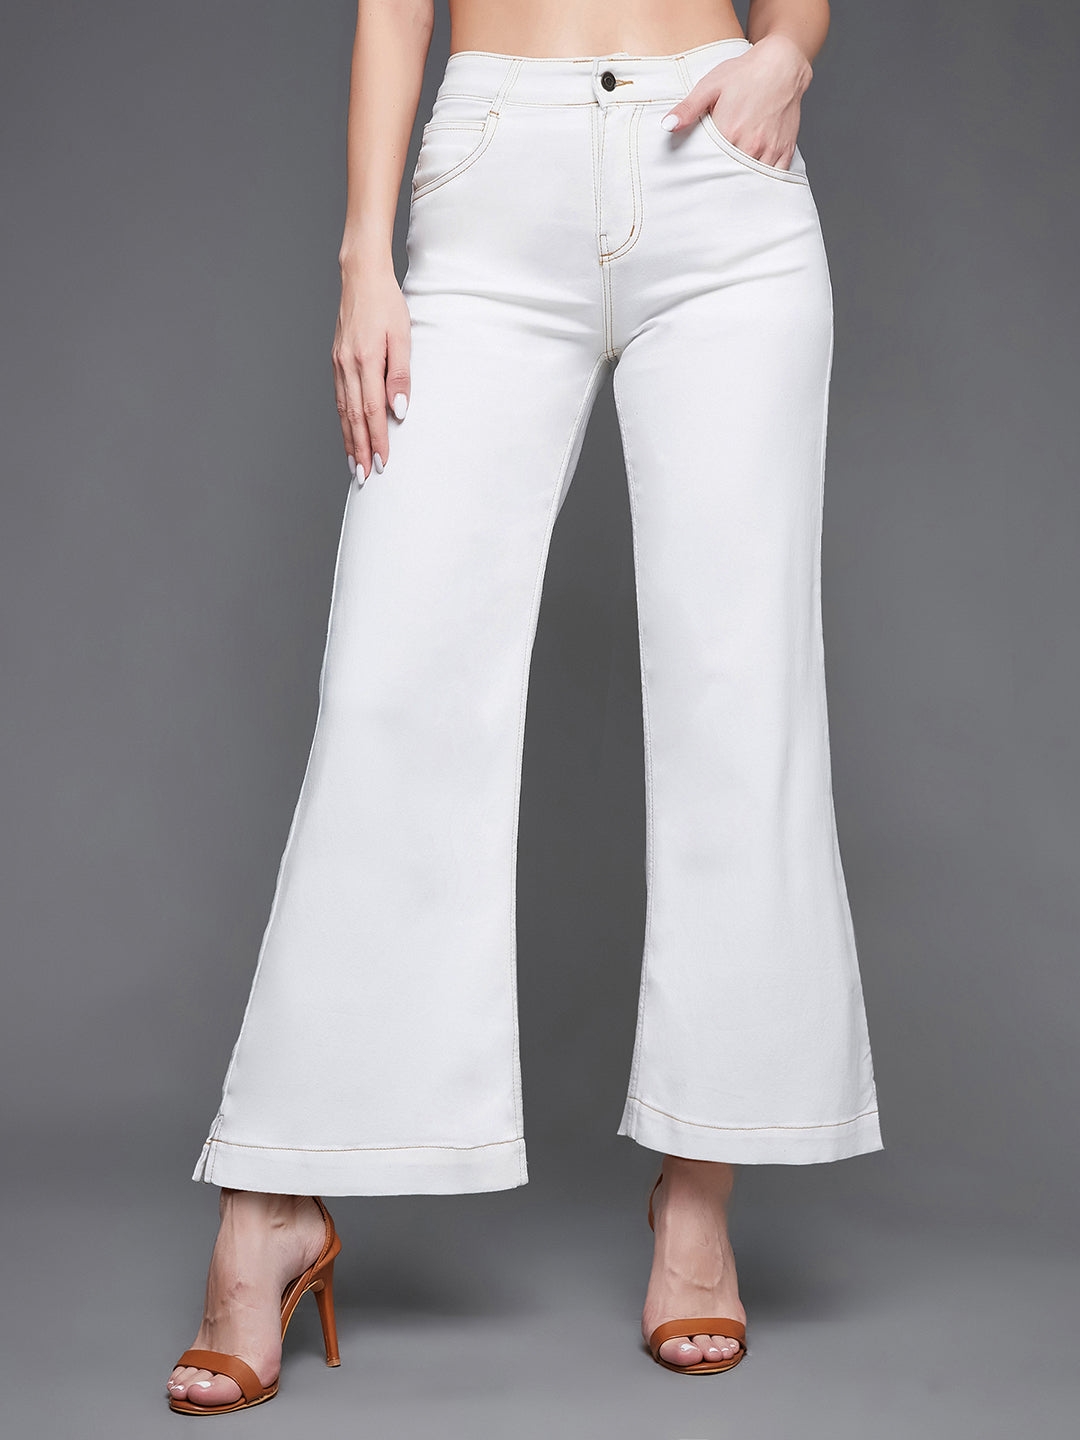 White Flared Mid Rise Clean Look Ankle length Stretchable Denim Jeans